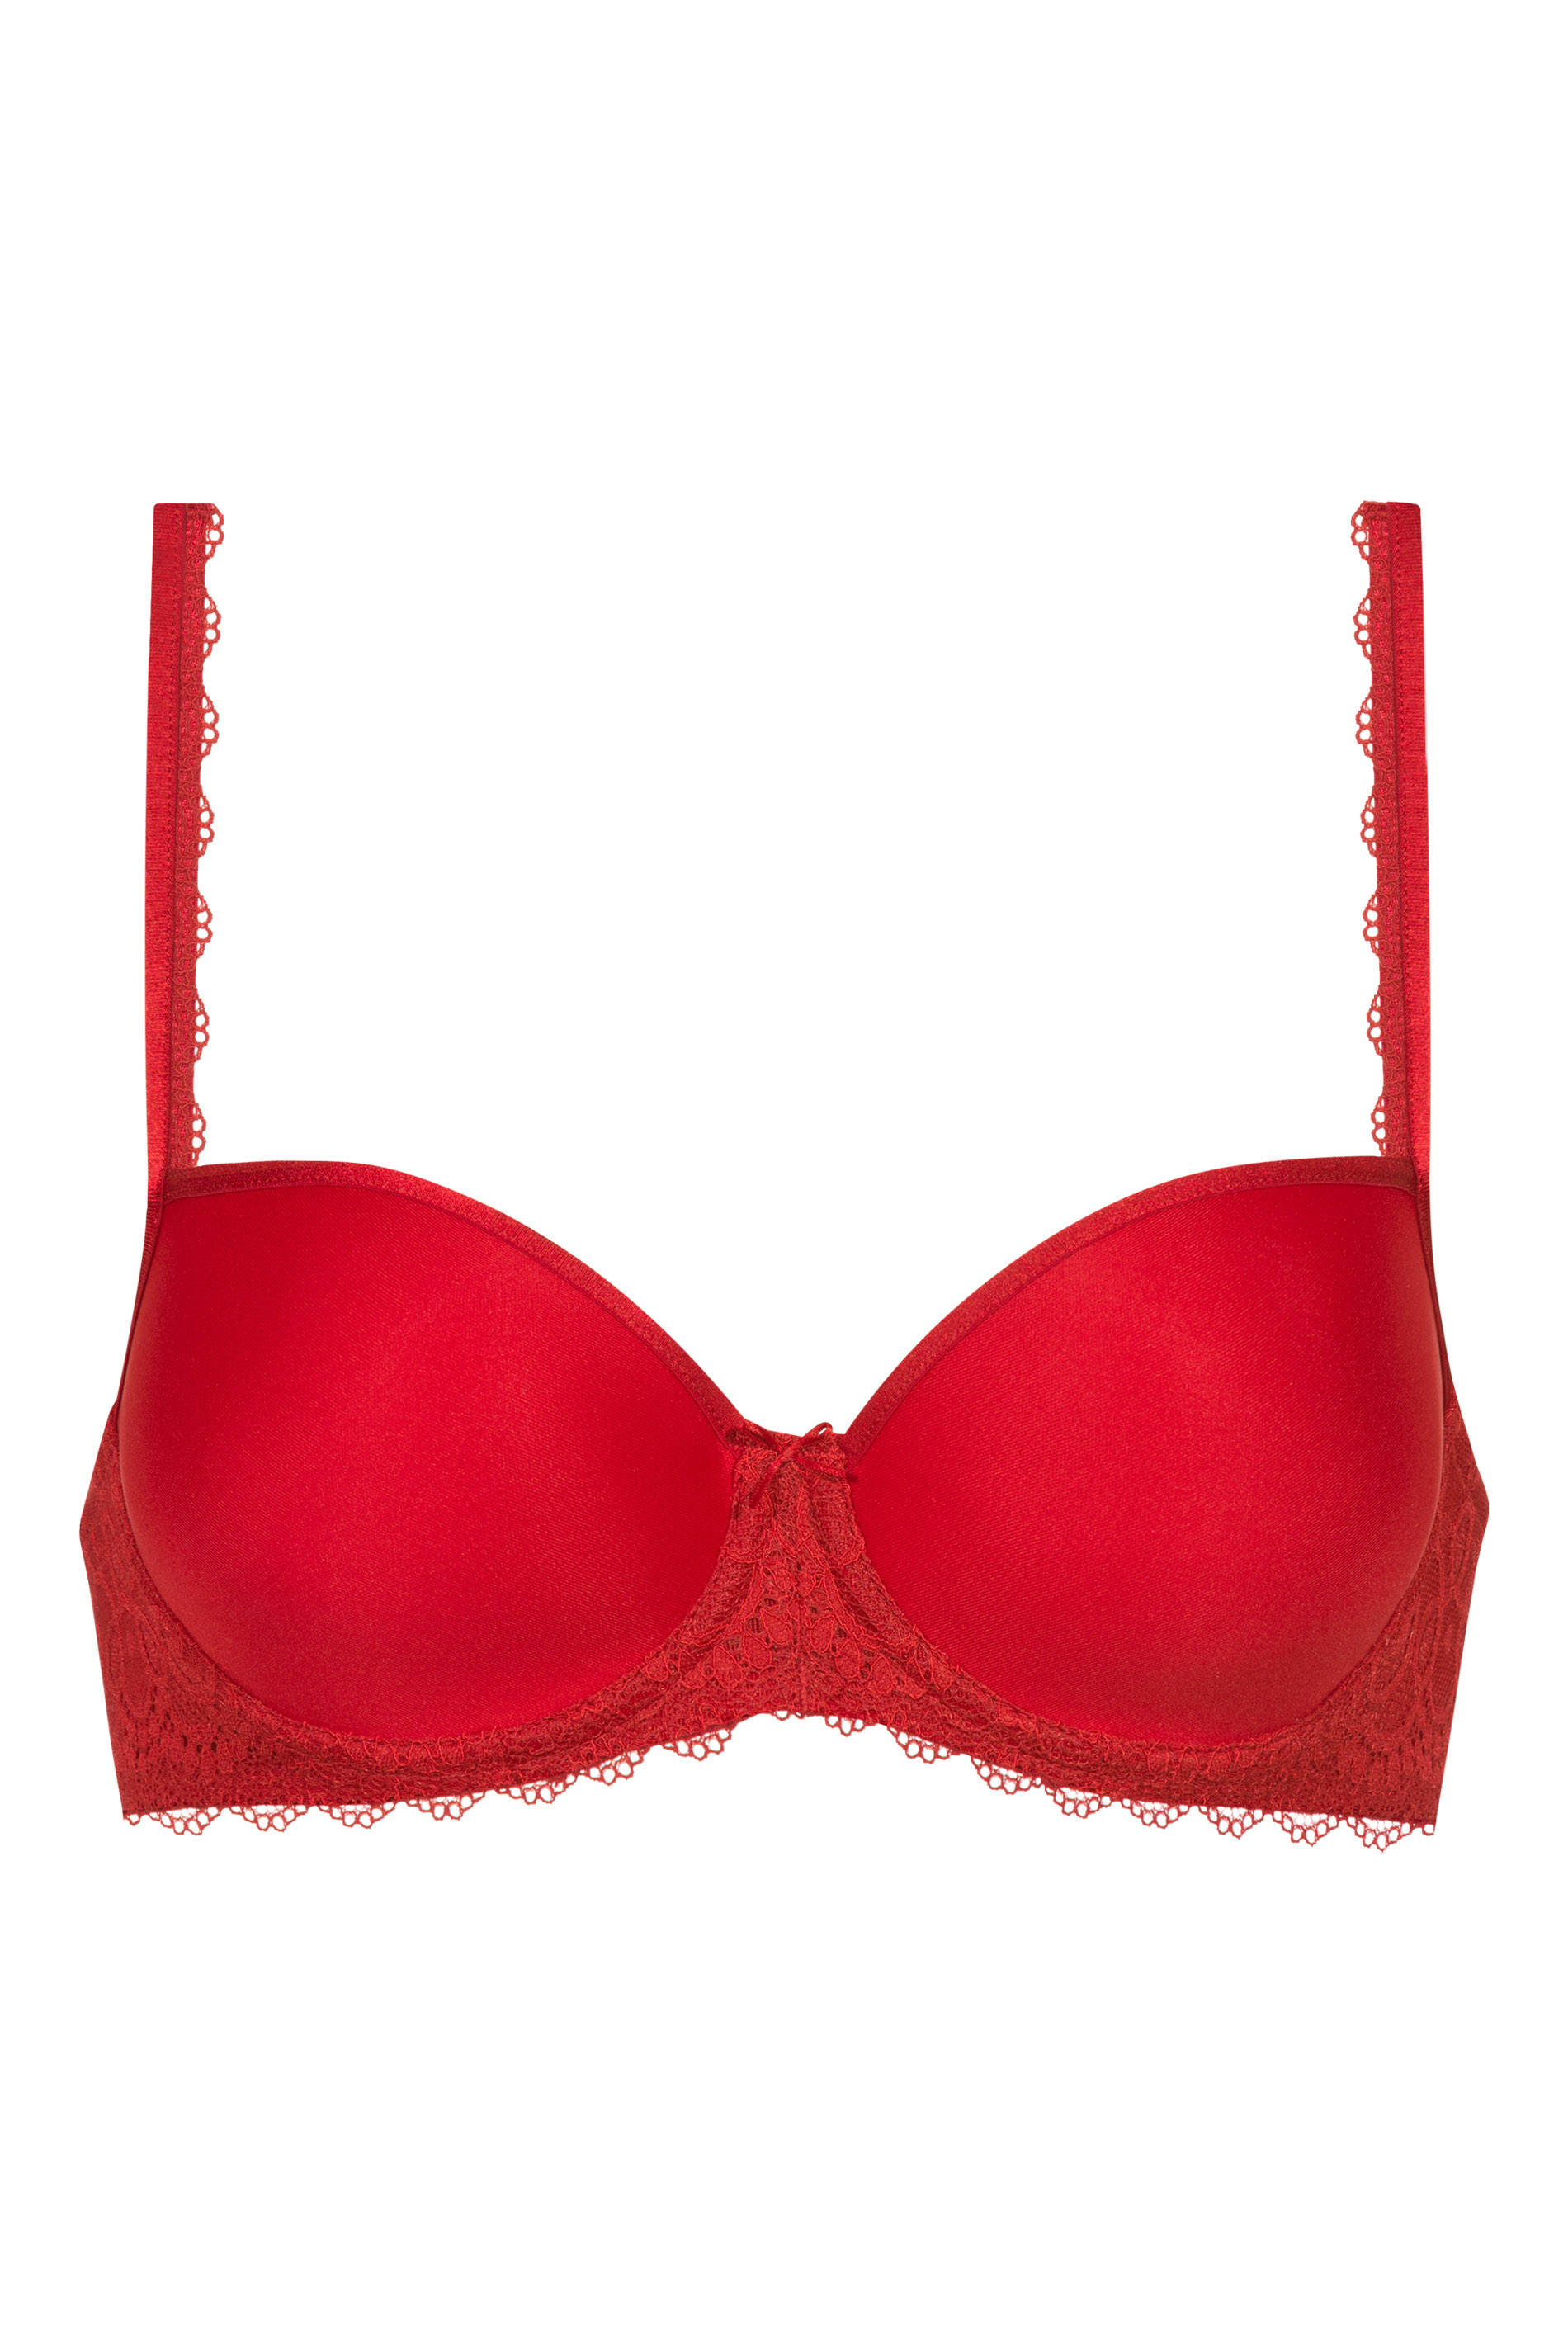 Spacer bra | Half Cup Rubin Serie Amorous Cut Out | mey®